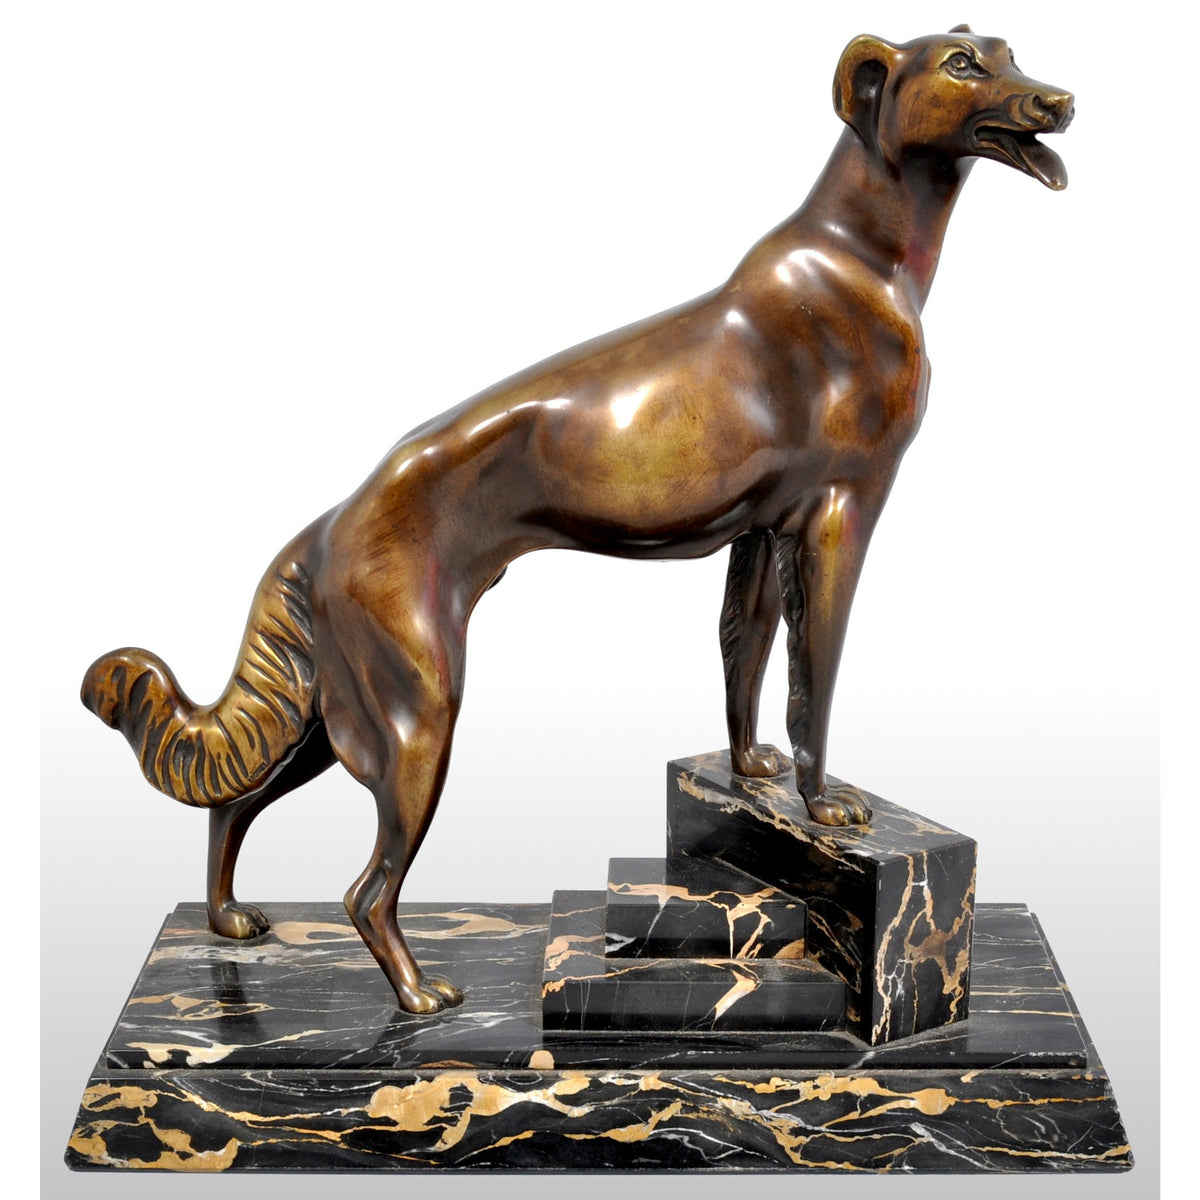 Antique Art Deco Bronze Russian Borzoi/Wolfhound/Dog by Louis-Albert Carvin (1875-1951)